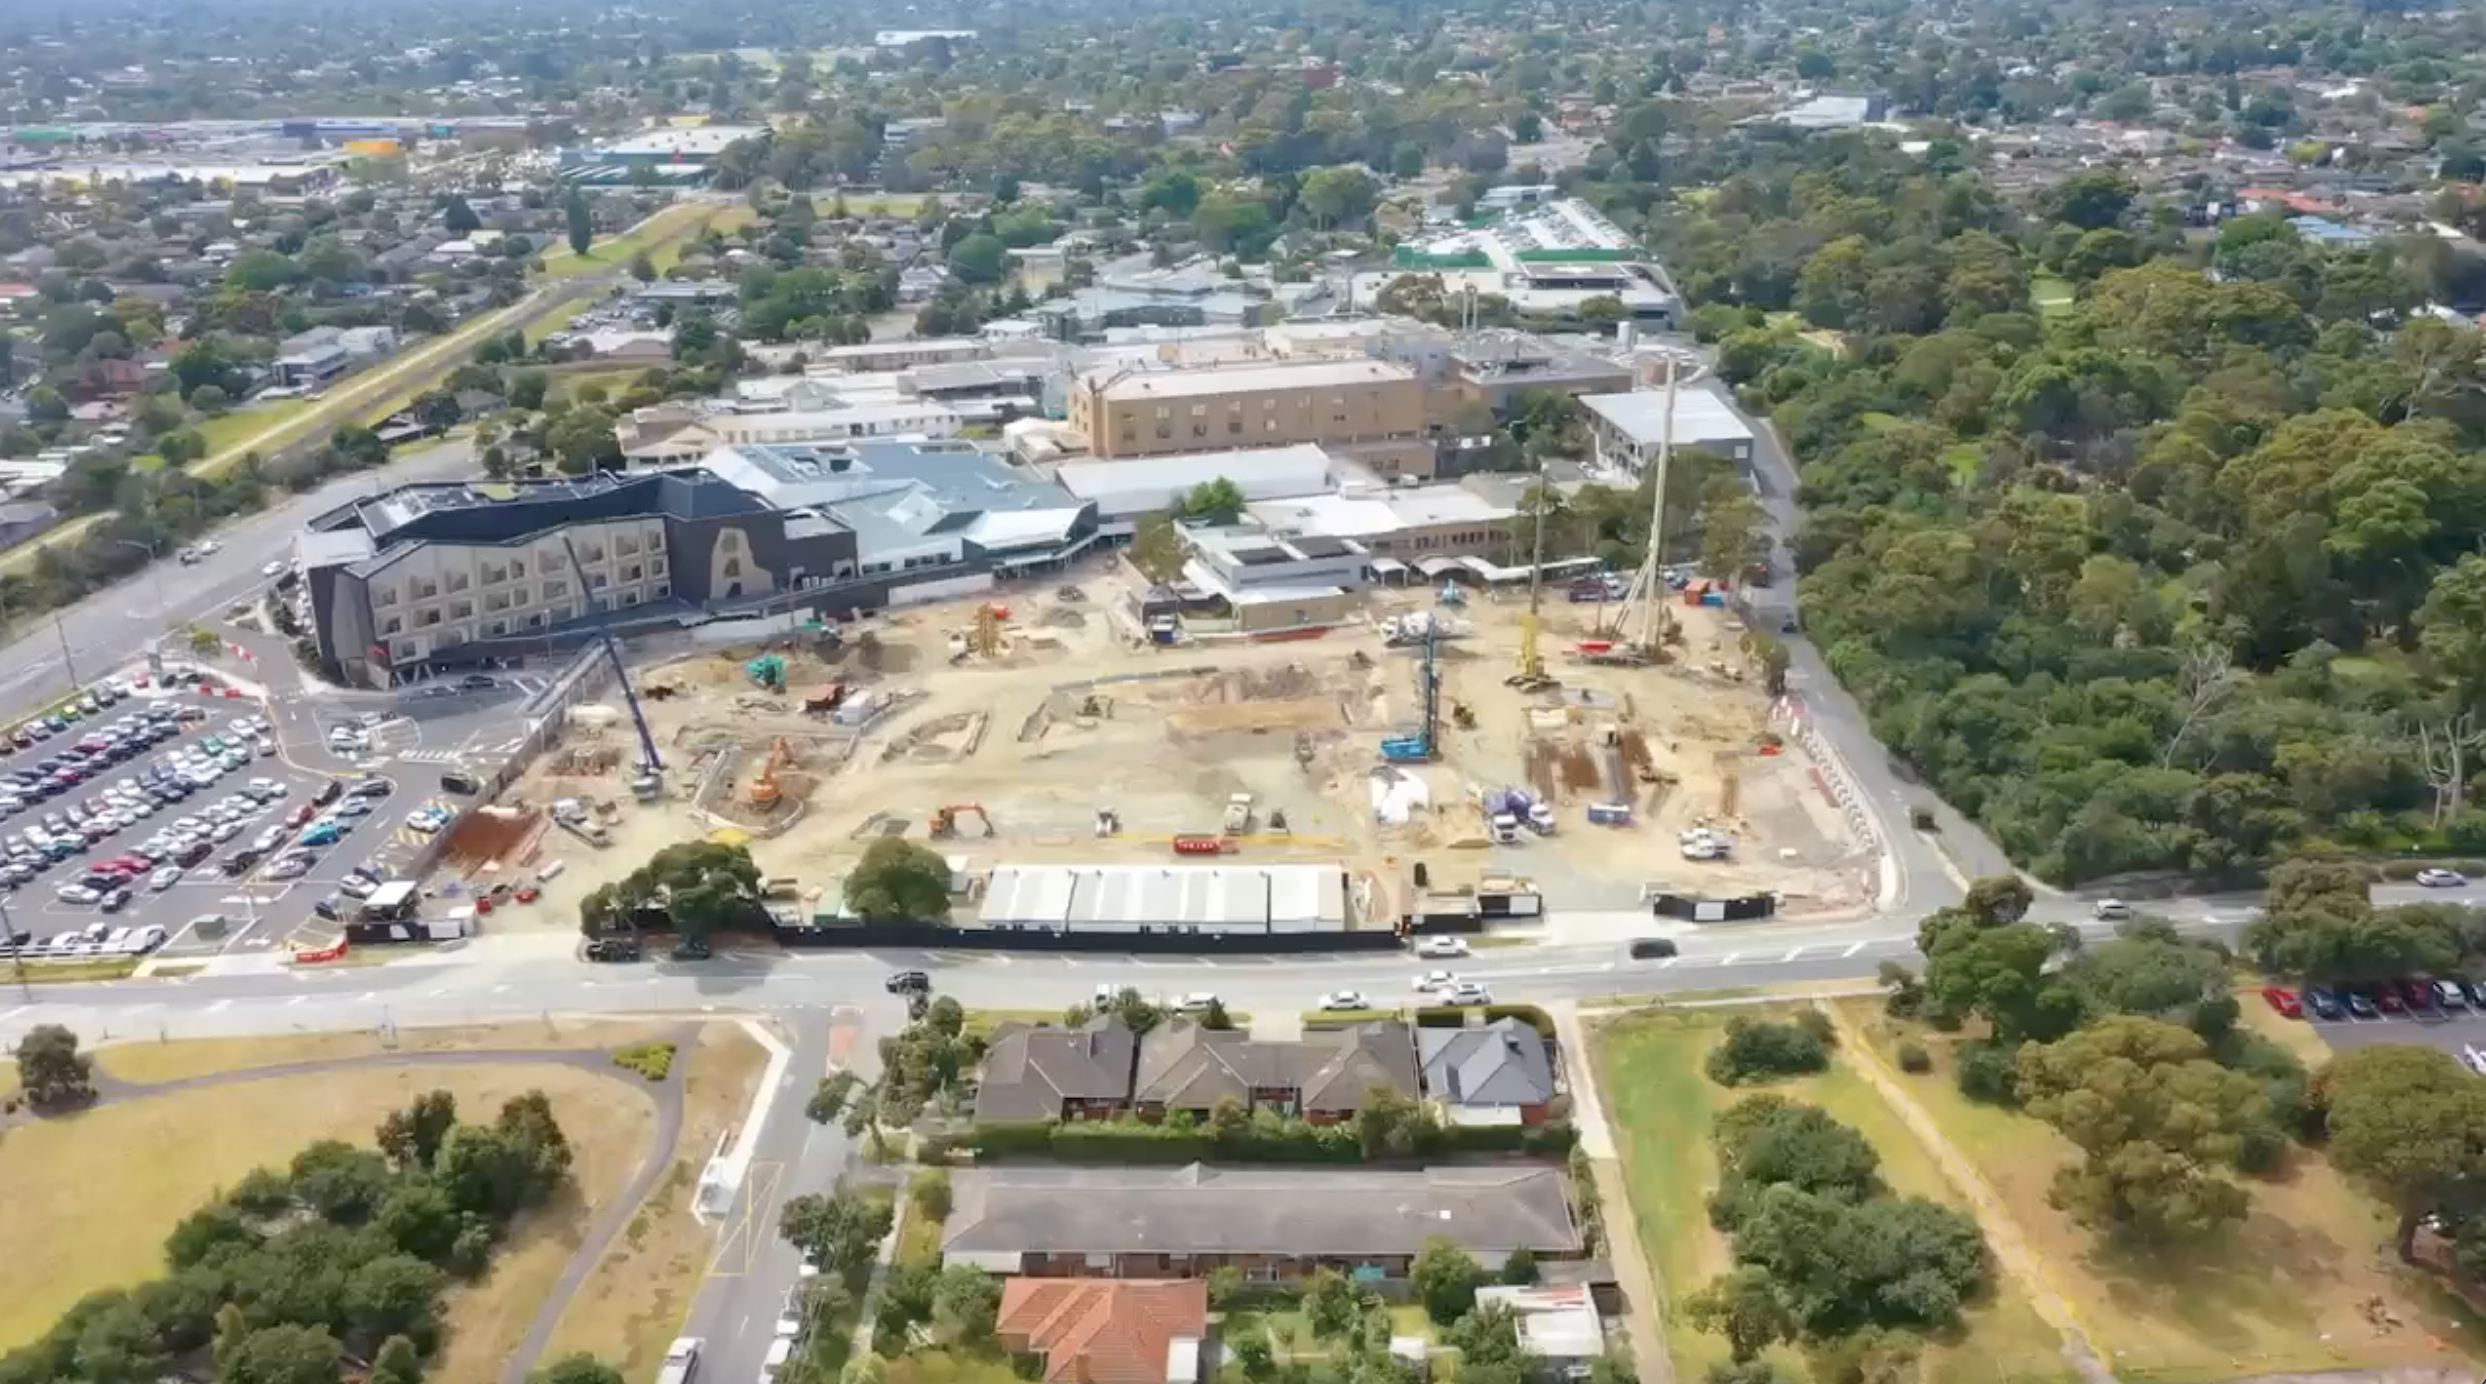 Construction photography of the Frankston Hospital site